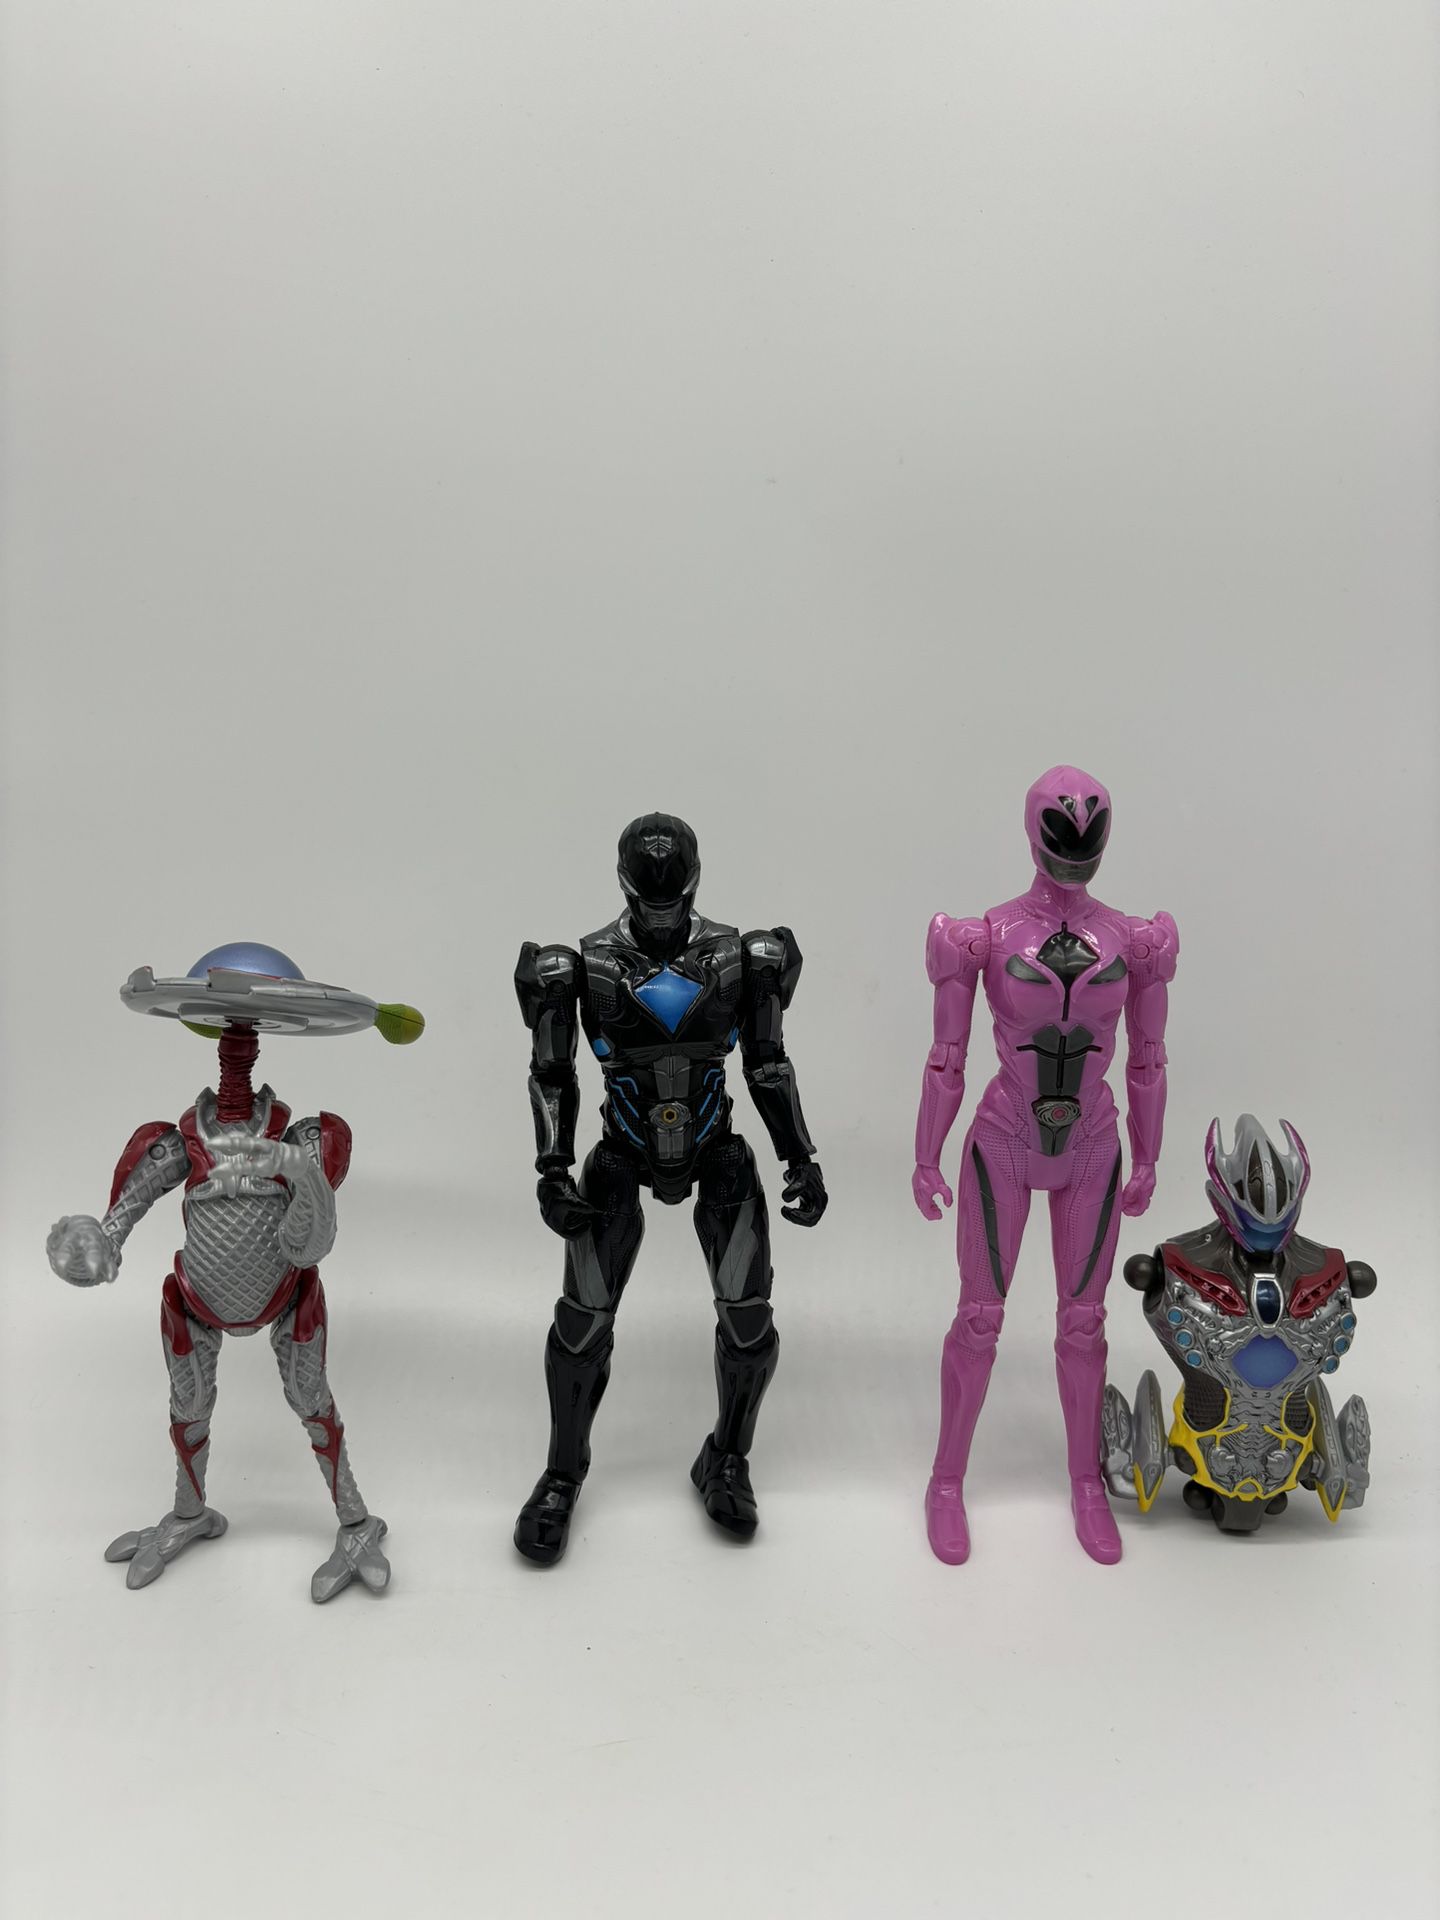  Power Rangers Mighty Morphin Movie Action Figure Lot Of 4- Black, Pink, Alpha 5, Megazord body